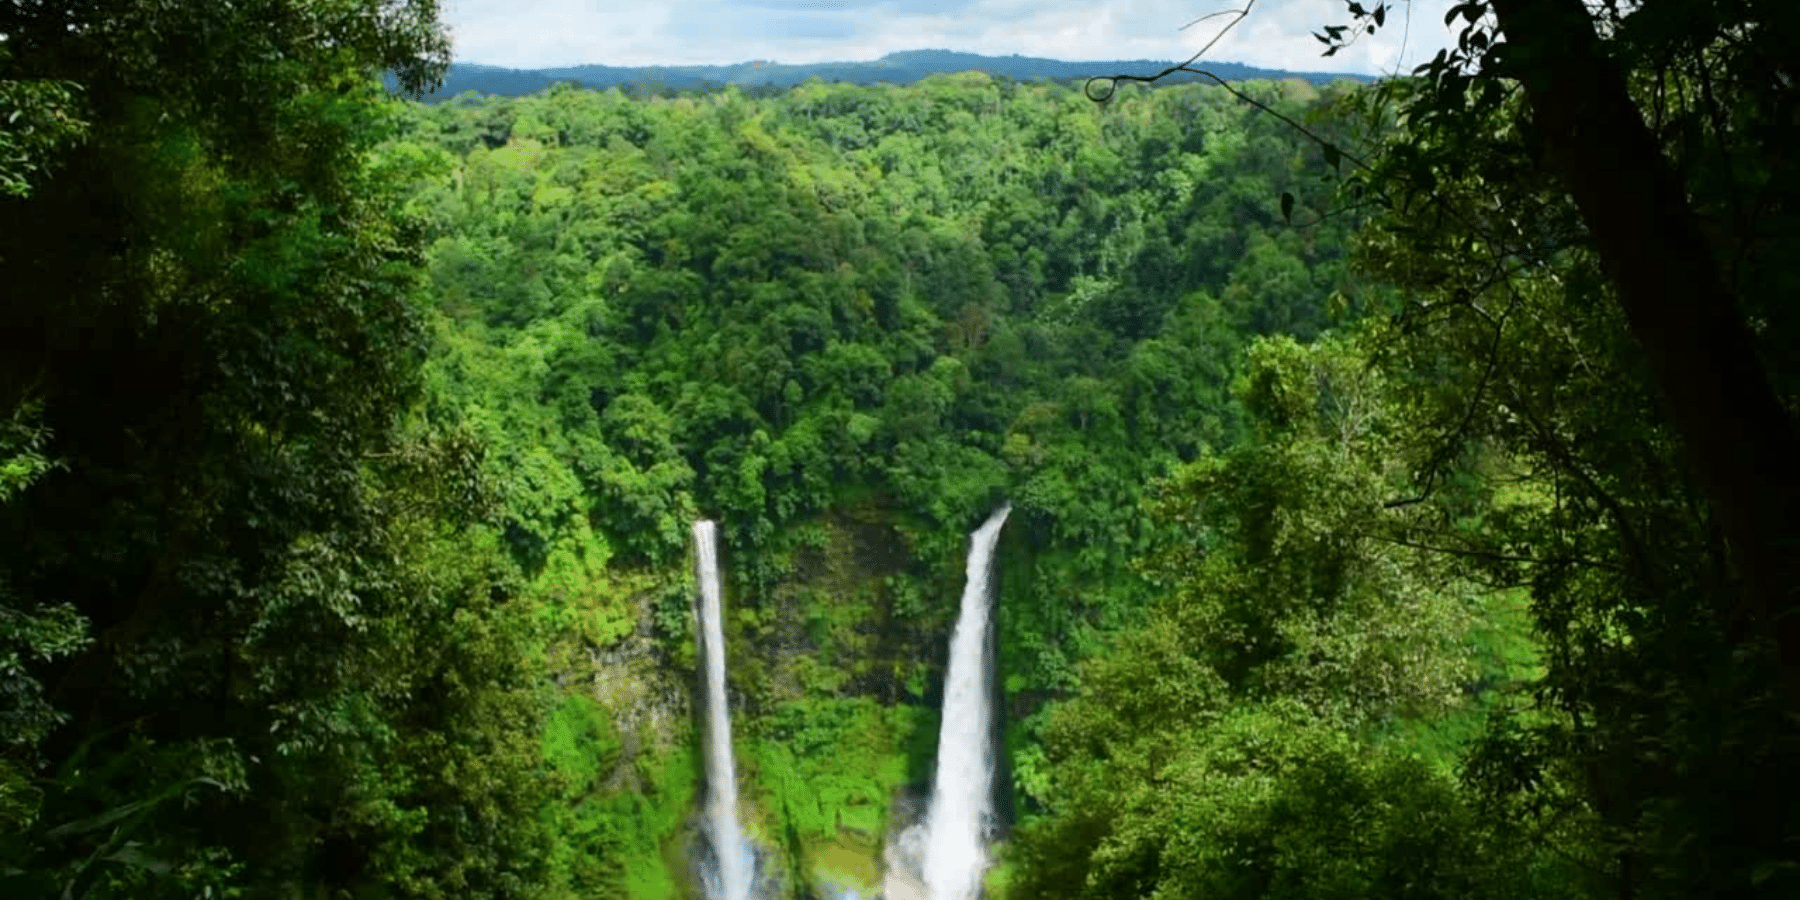 Two waterfalls spill out from lush green rainforest